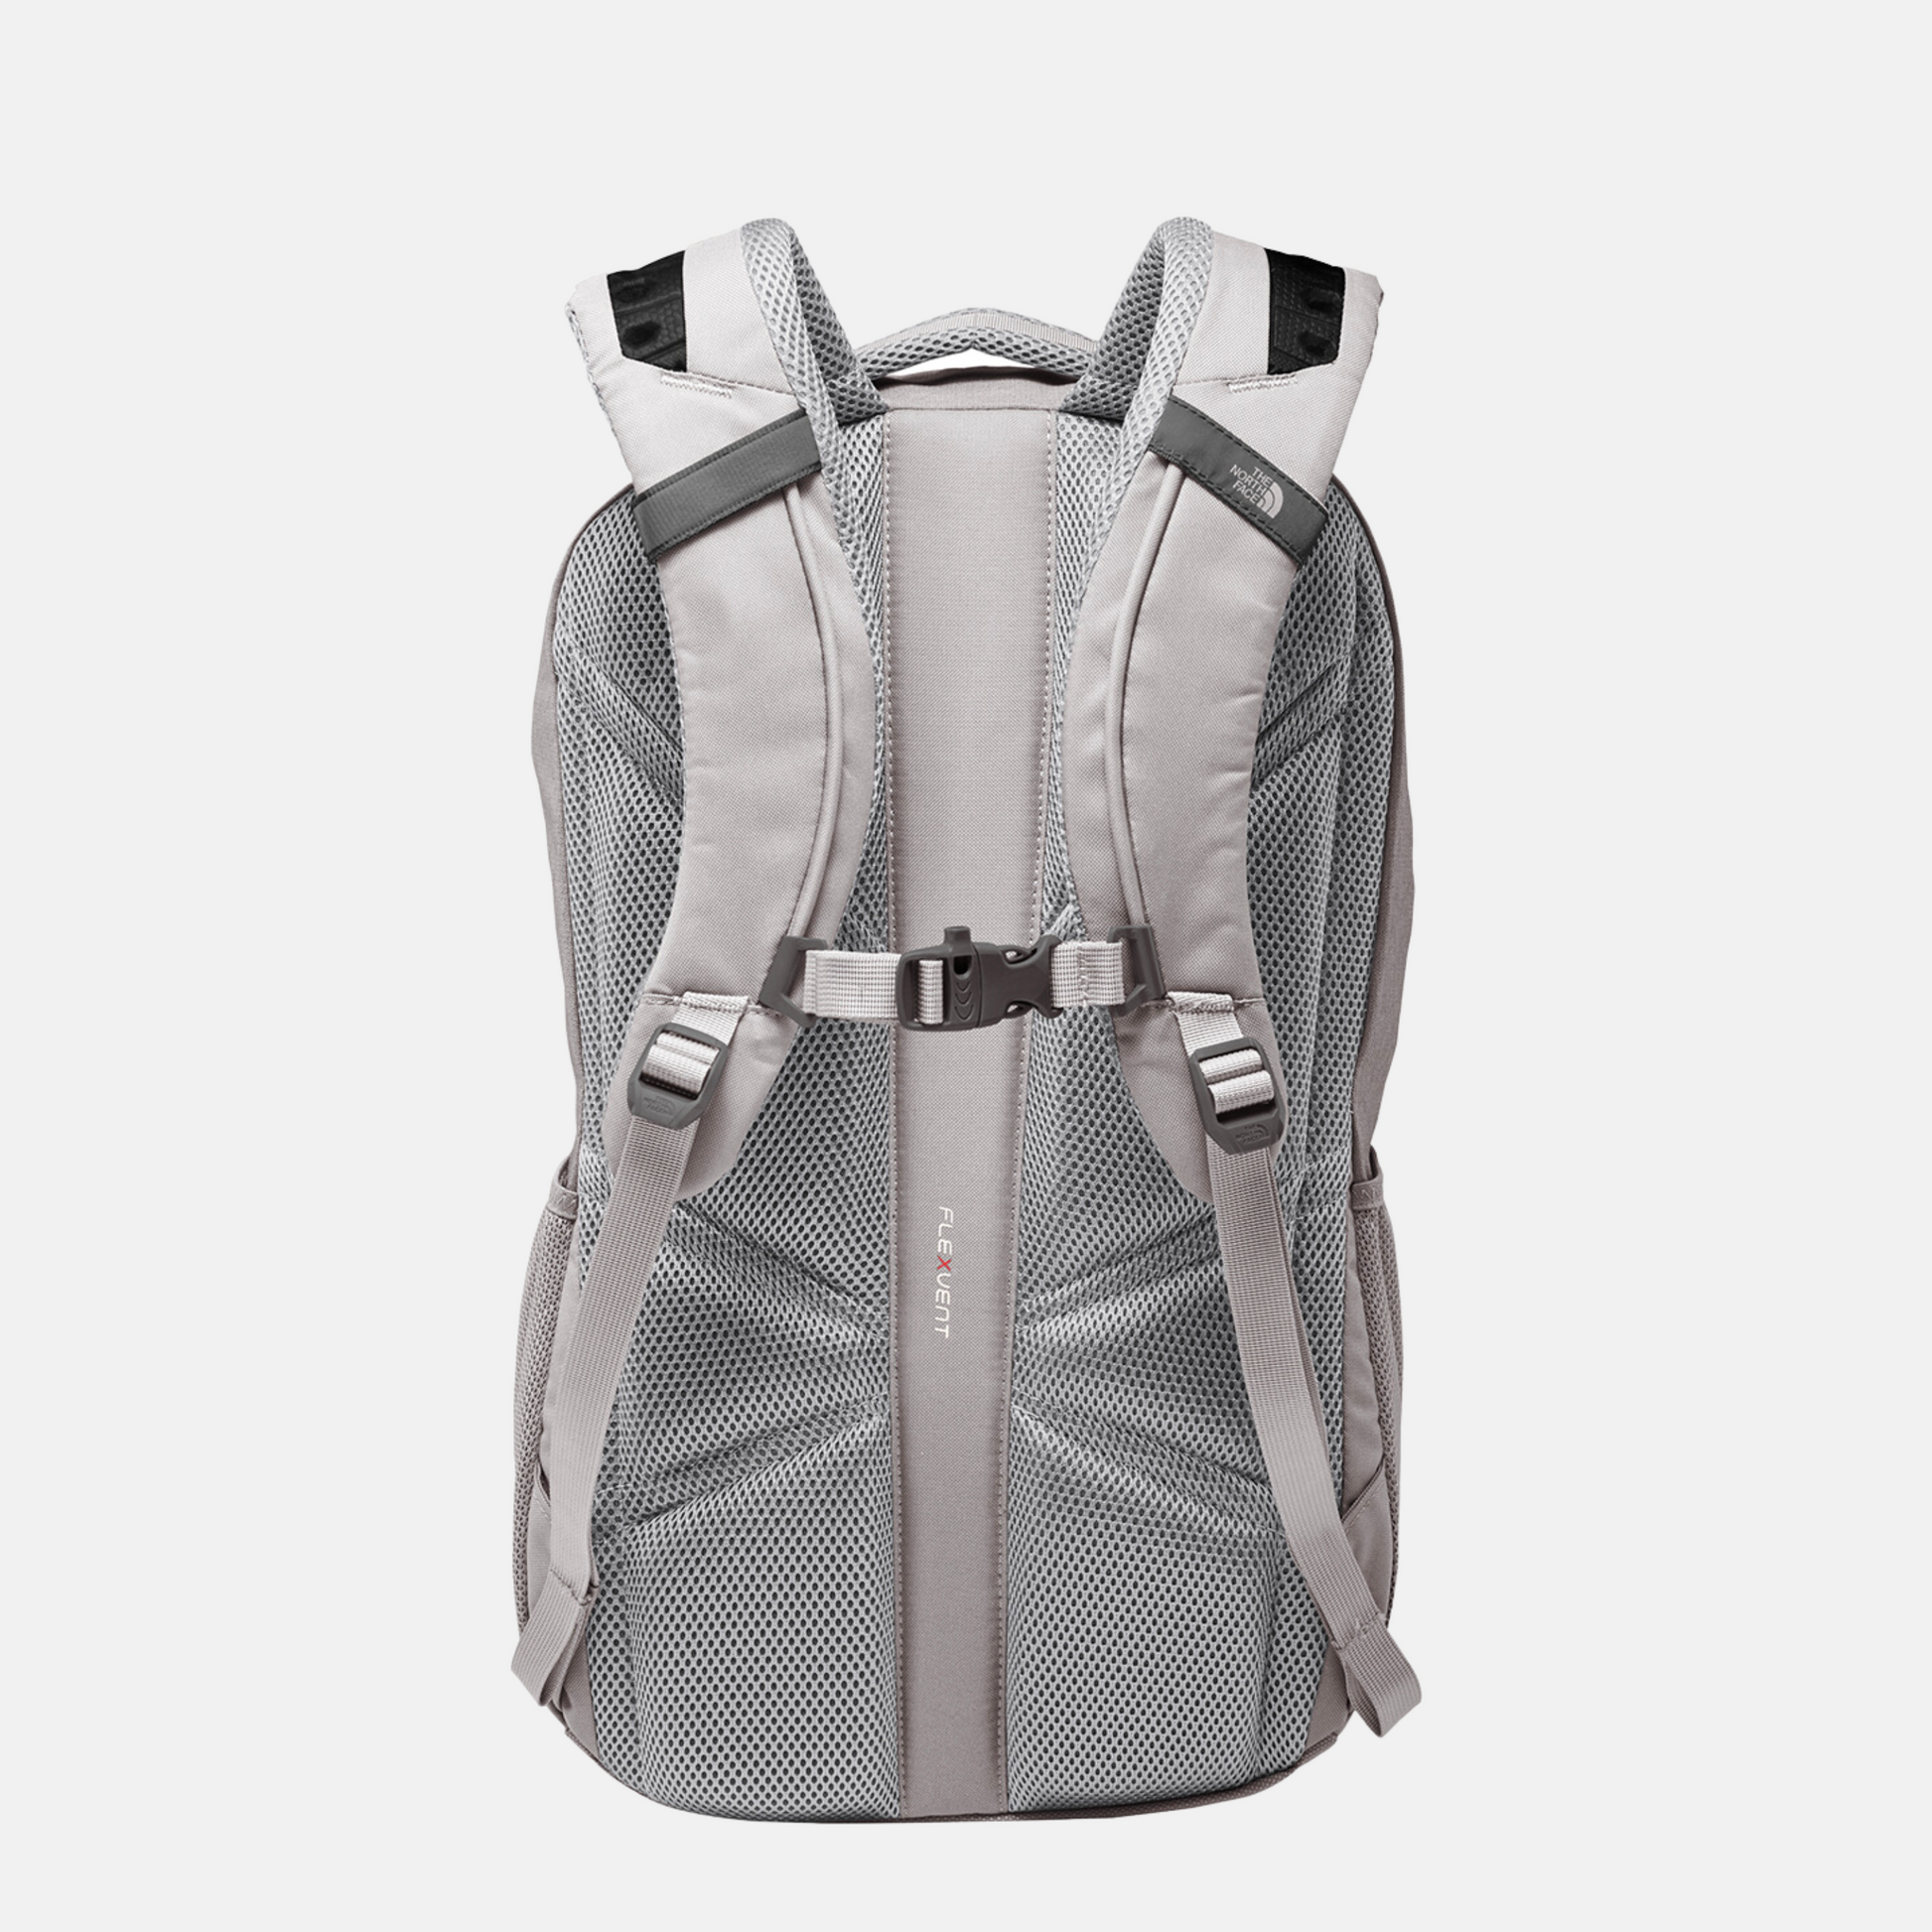 The North Face Connector Backpack - Shop BirdieBox